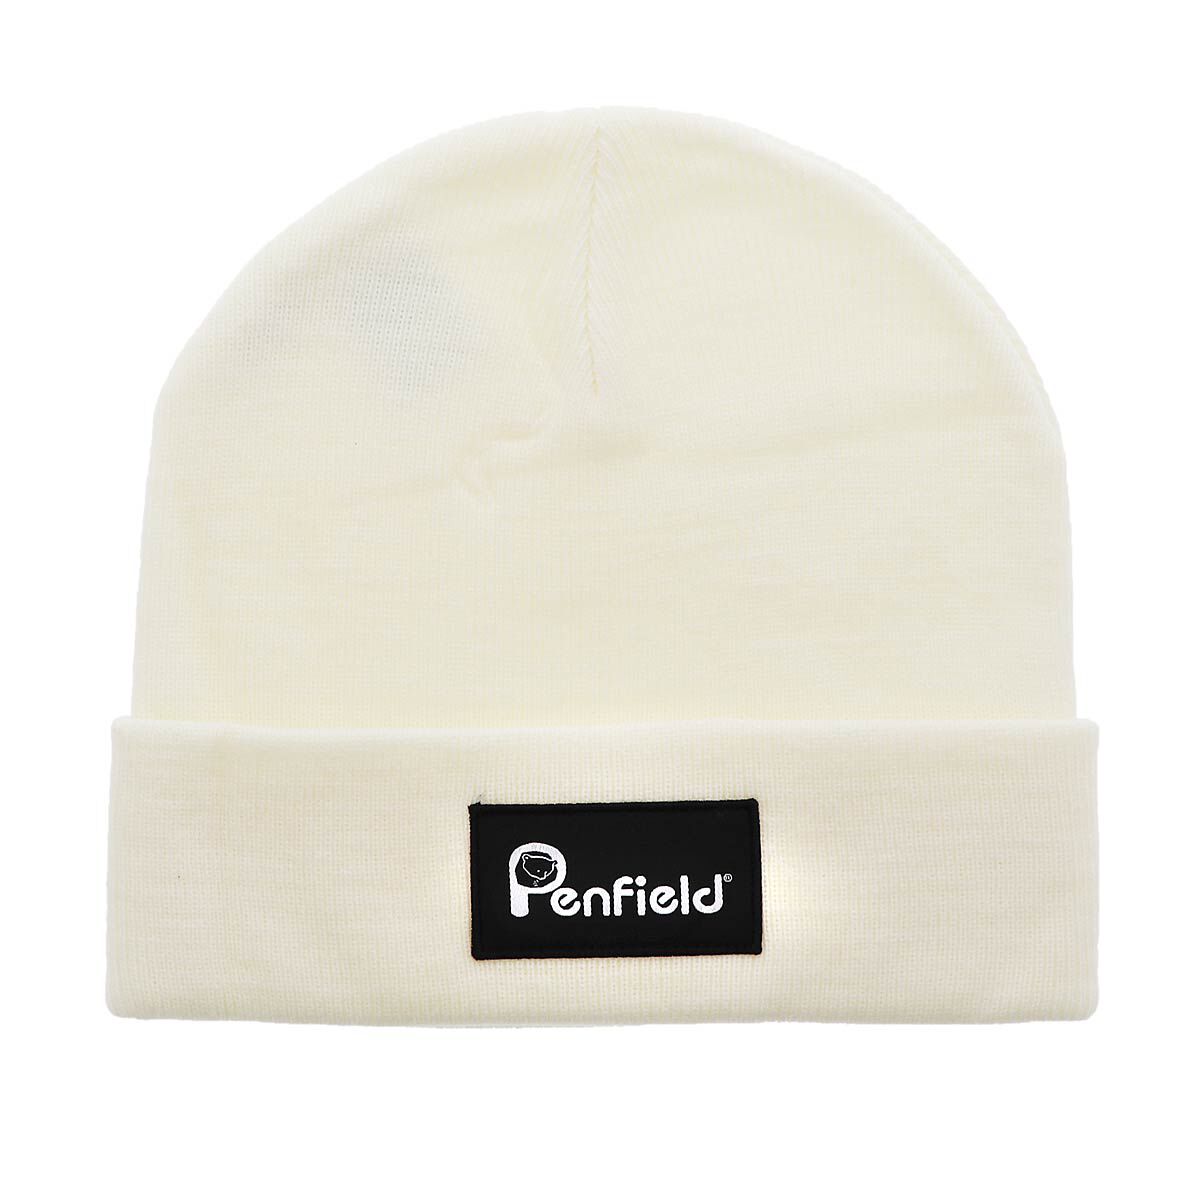 Penfield: high-quality products available at KICKZ.com